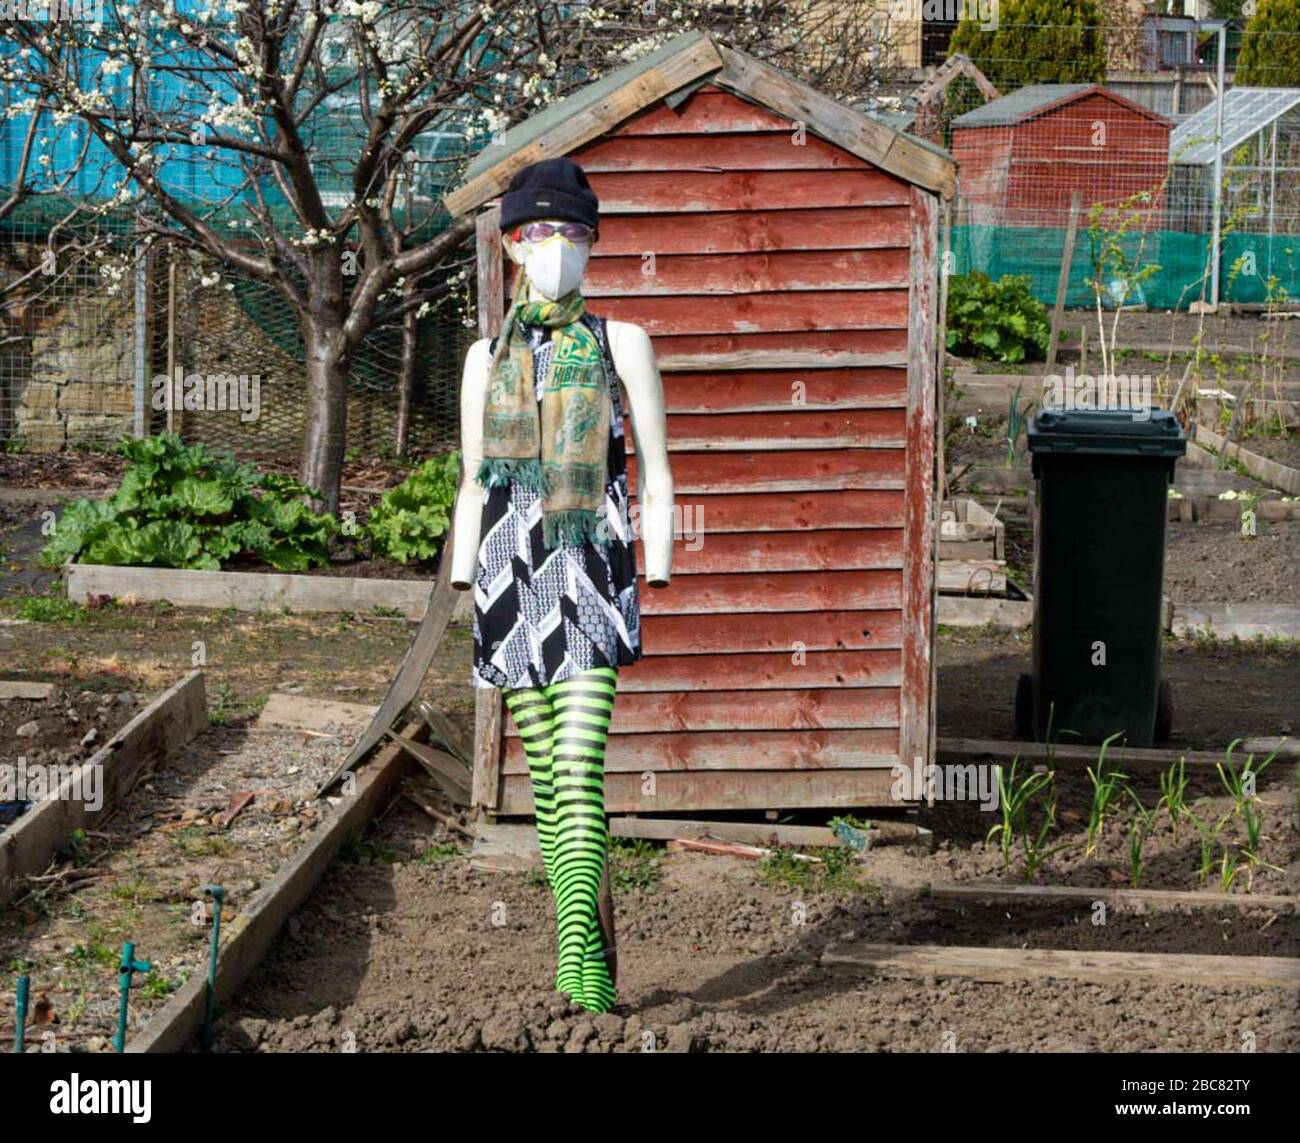 Edinburgh, UK. 3rd Apr 2020. Covid-19 - Restalrig railway path, Edinburgh. Restalrig railway path, Edinburgh, Midlothian, UK. , . Pic shows: In Leith, Edinburgh, even the scarecrows in the allotments are not only stylish but wearing protective masks. Credit: Ian Jacobs/Alamy Live News Stock Photo